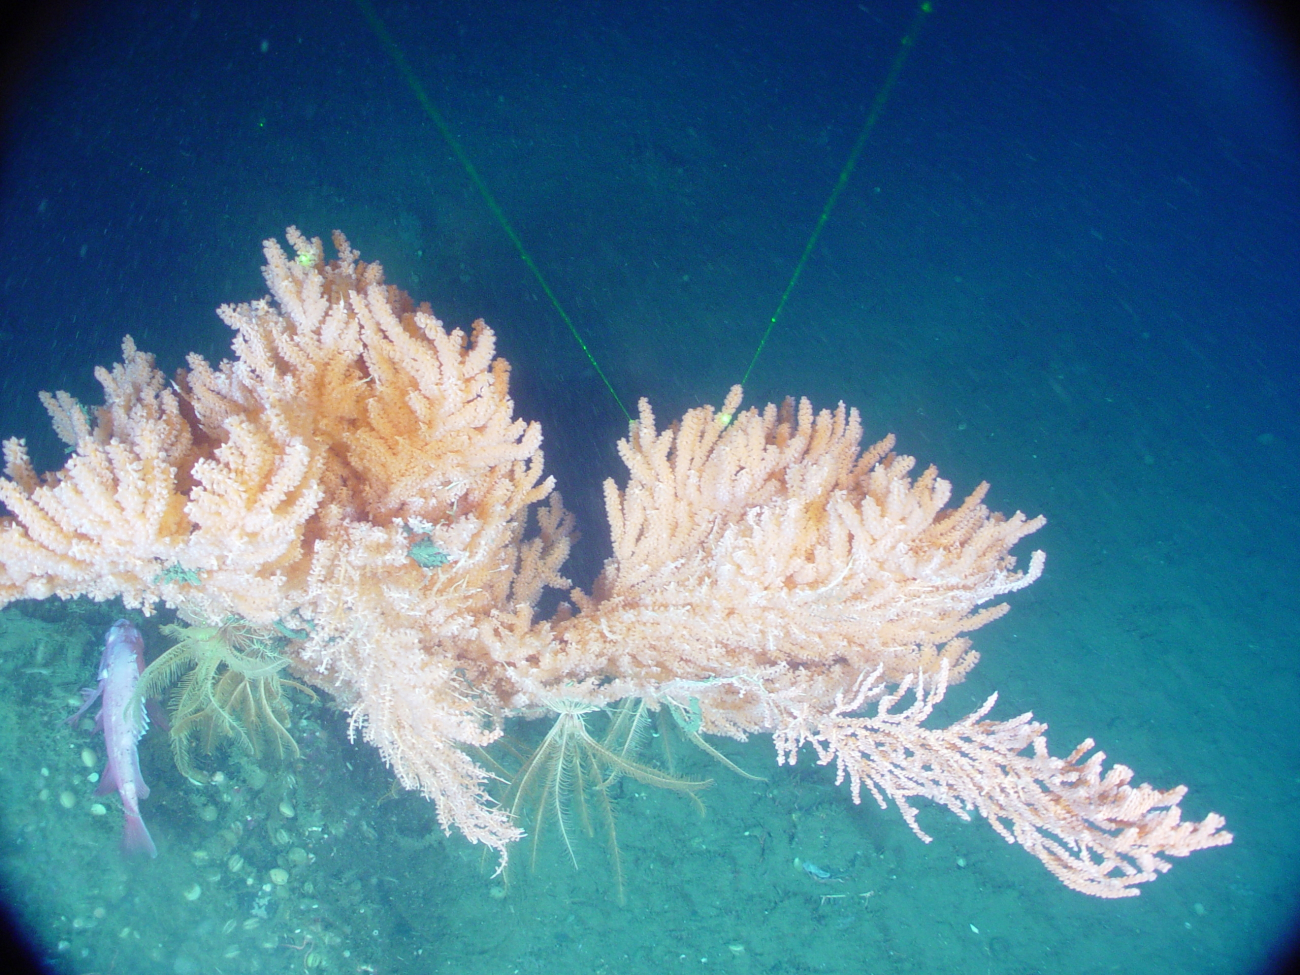 Soft coral, feather stars, and rockfish